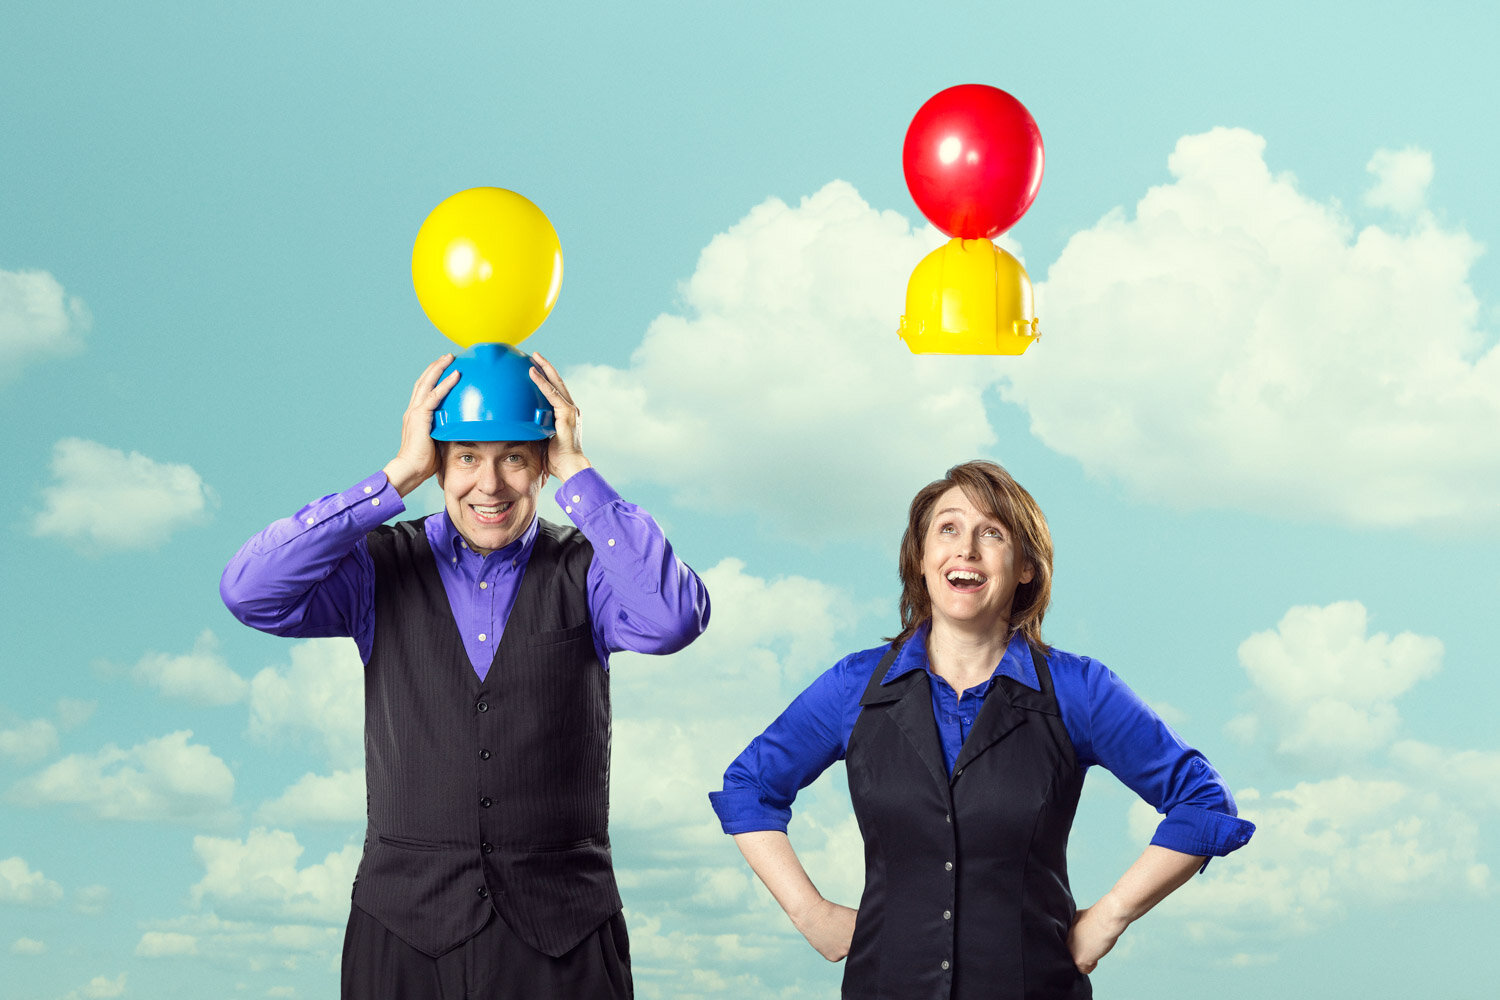 promotional photo of juggler duo with hard hats and floating balloons by portrait photographer Hanna Agar